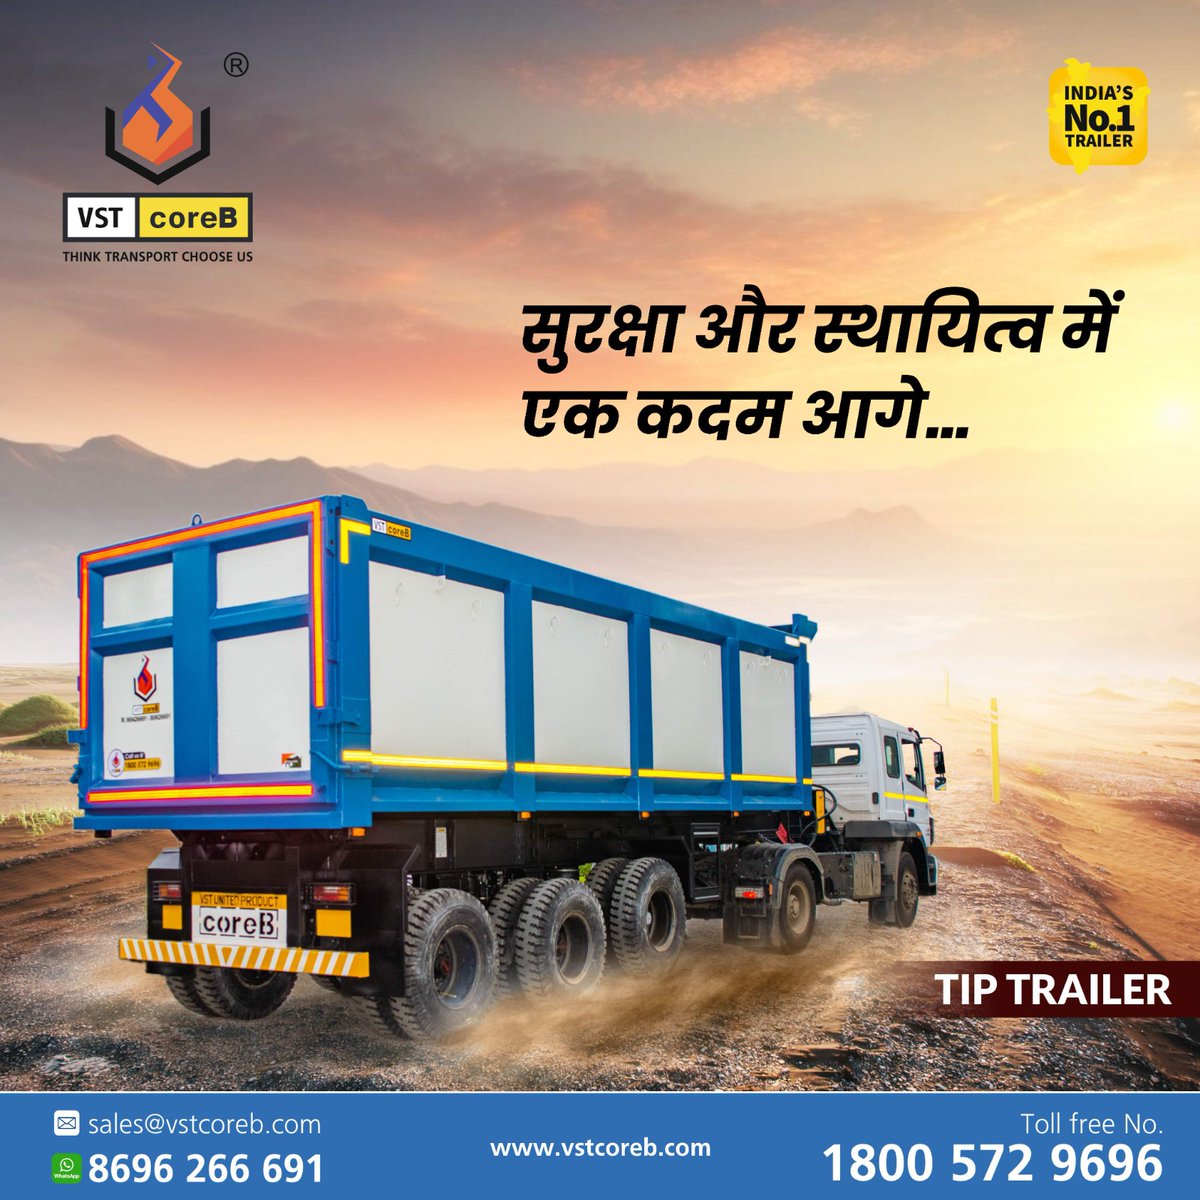 Unleash the Power of Quality and Efficiency with @VSTcoreB Cutting-Edge Solutions.
.
#vstcoreb #trailers #trailermanufacturer #tiptrailer #tippingtrailer #flatbedtrailer #skeletaltrailer #containertrailer